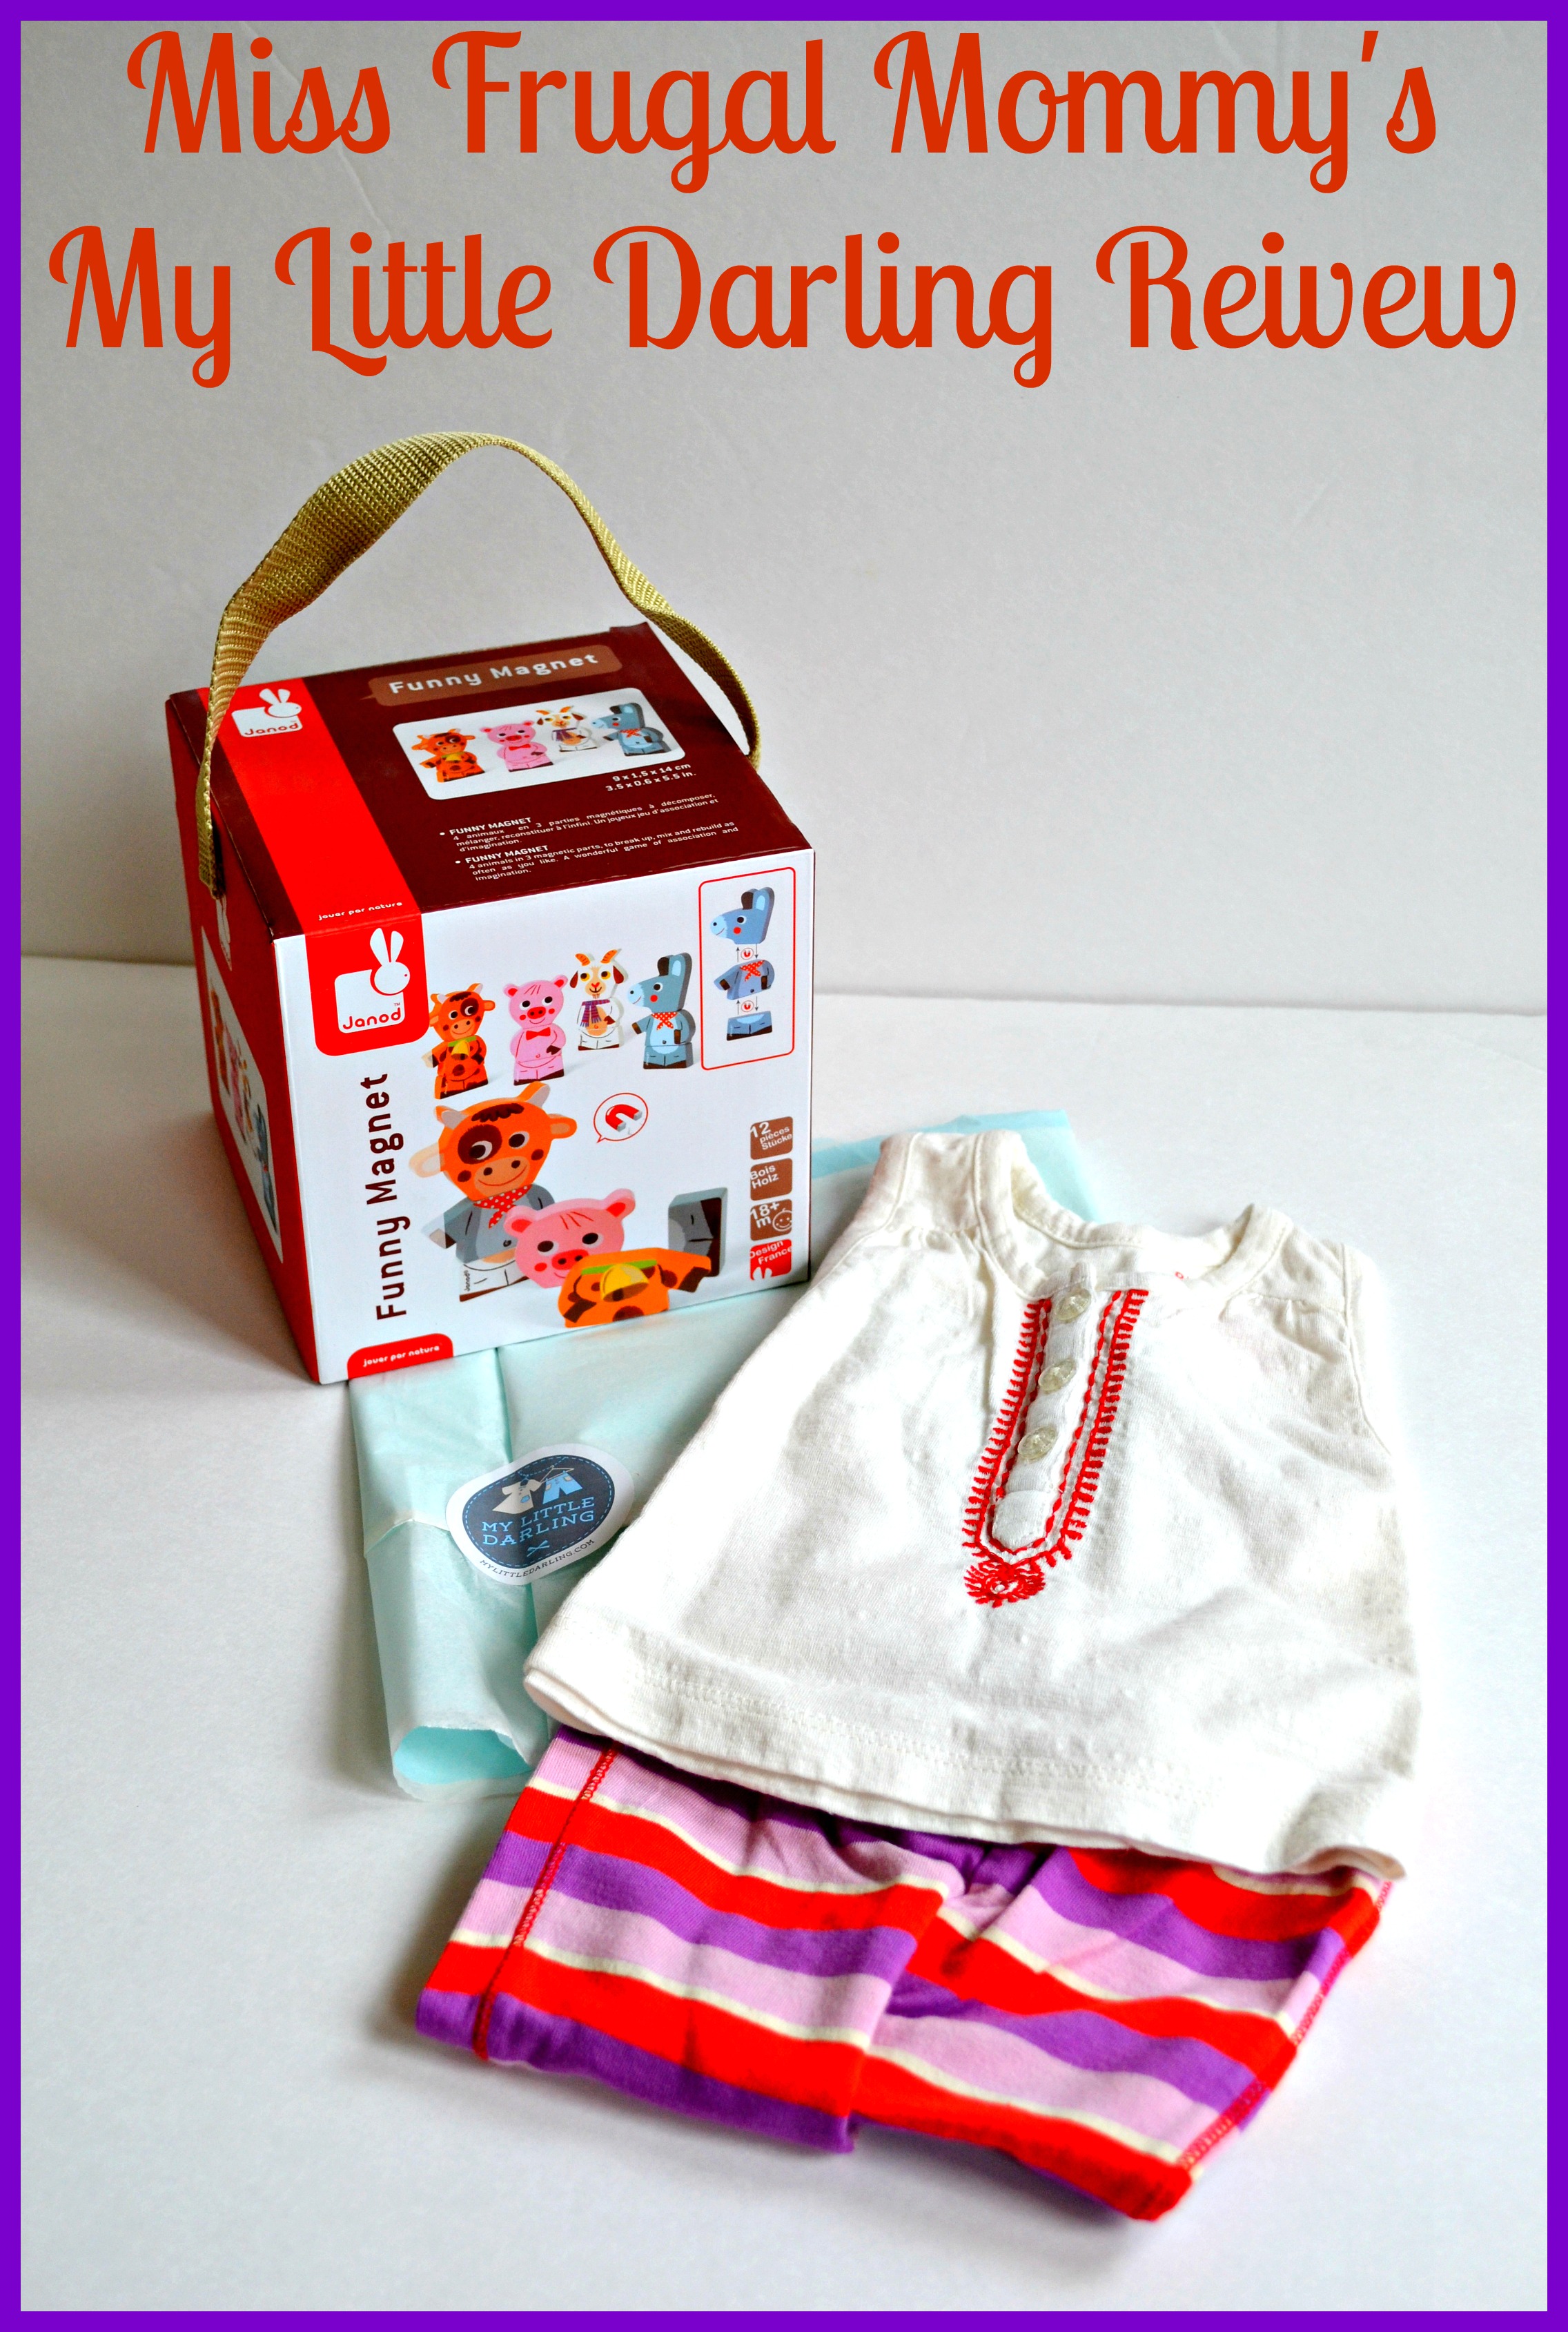 My Little Darling Review (Getting Ready For Baby Gift Guide)